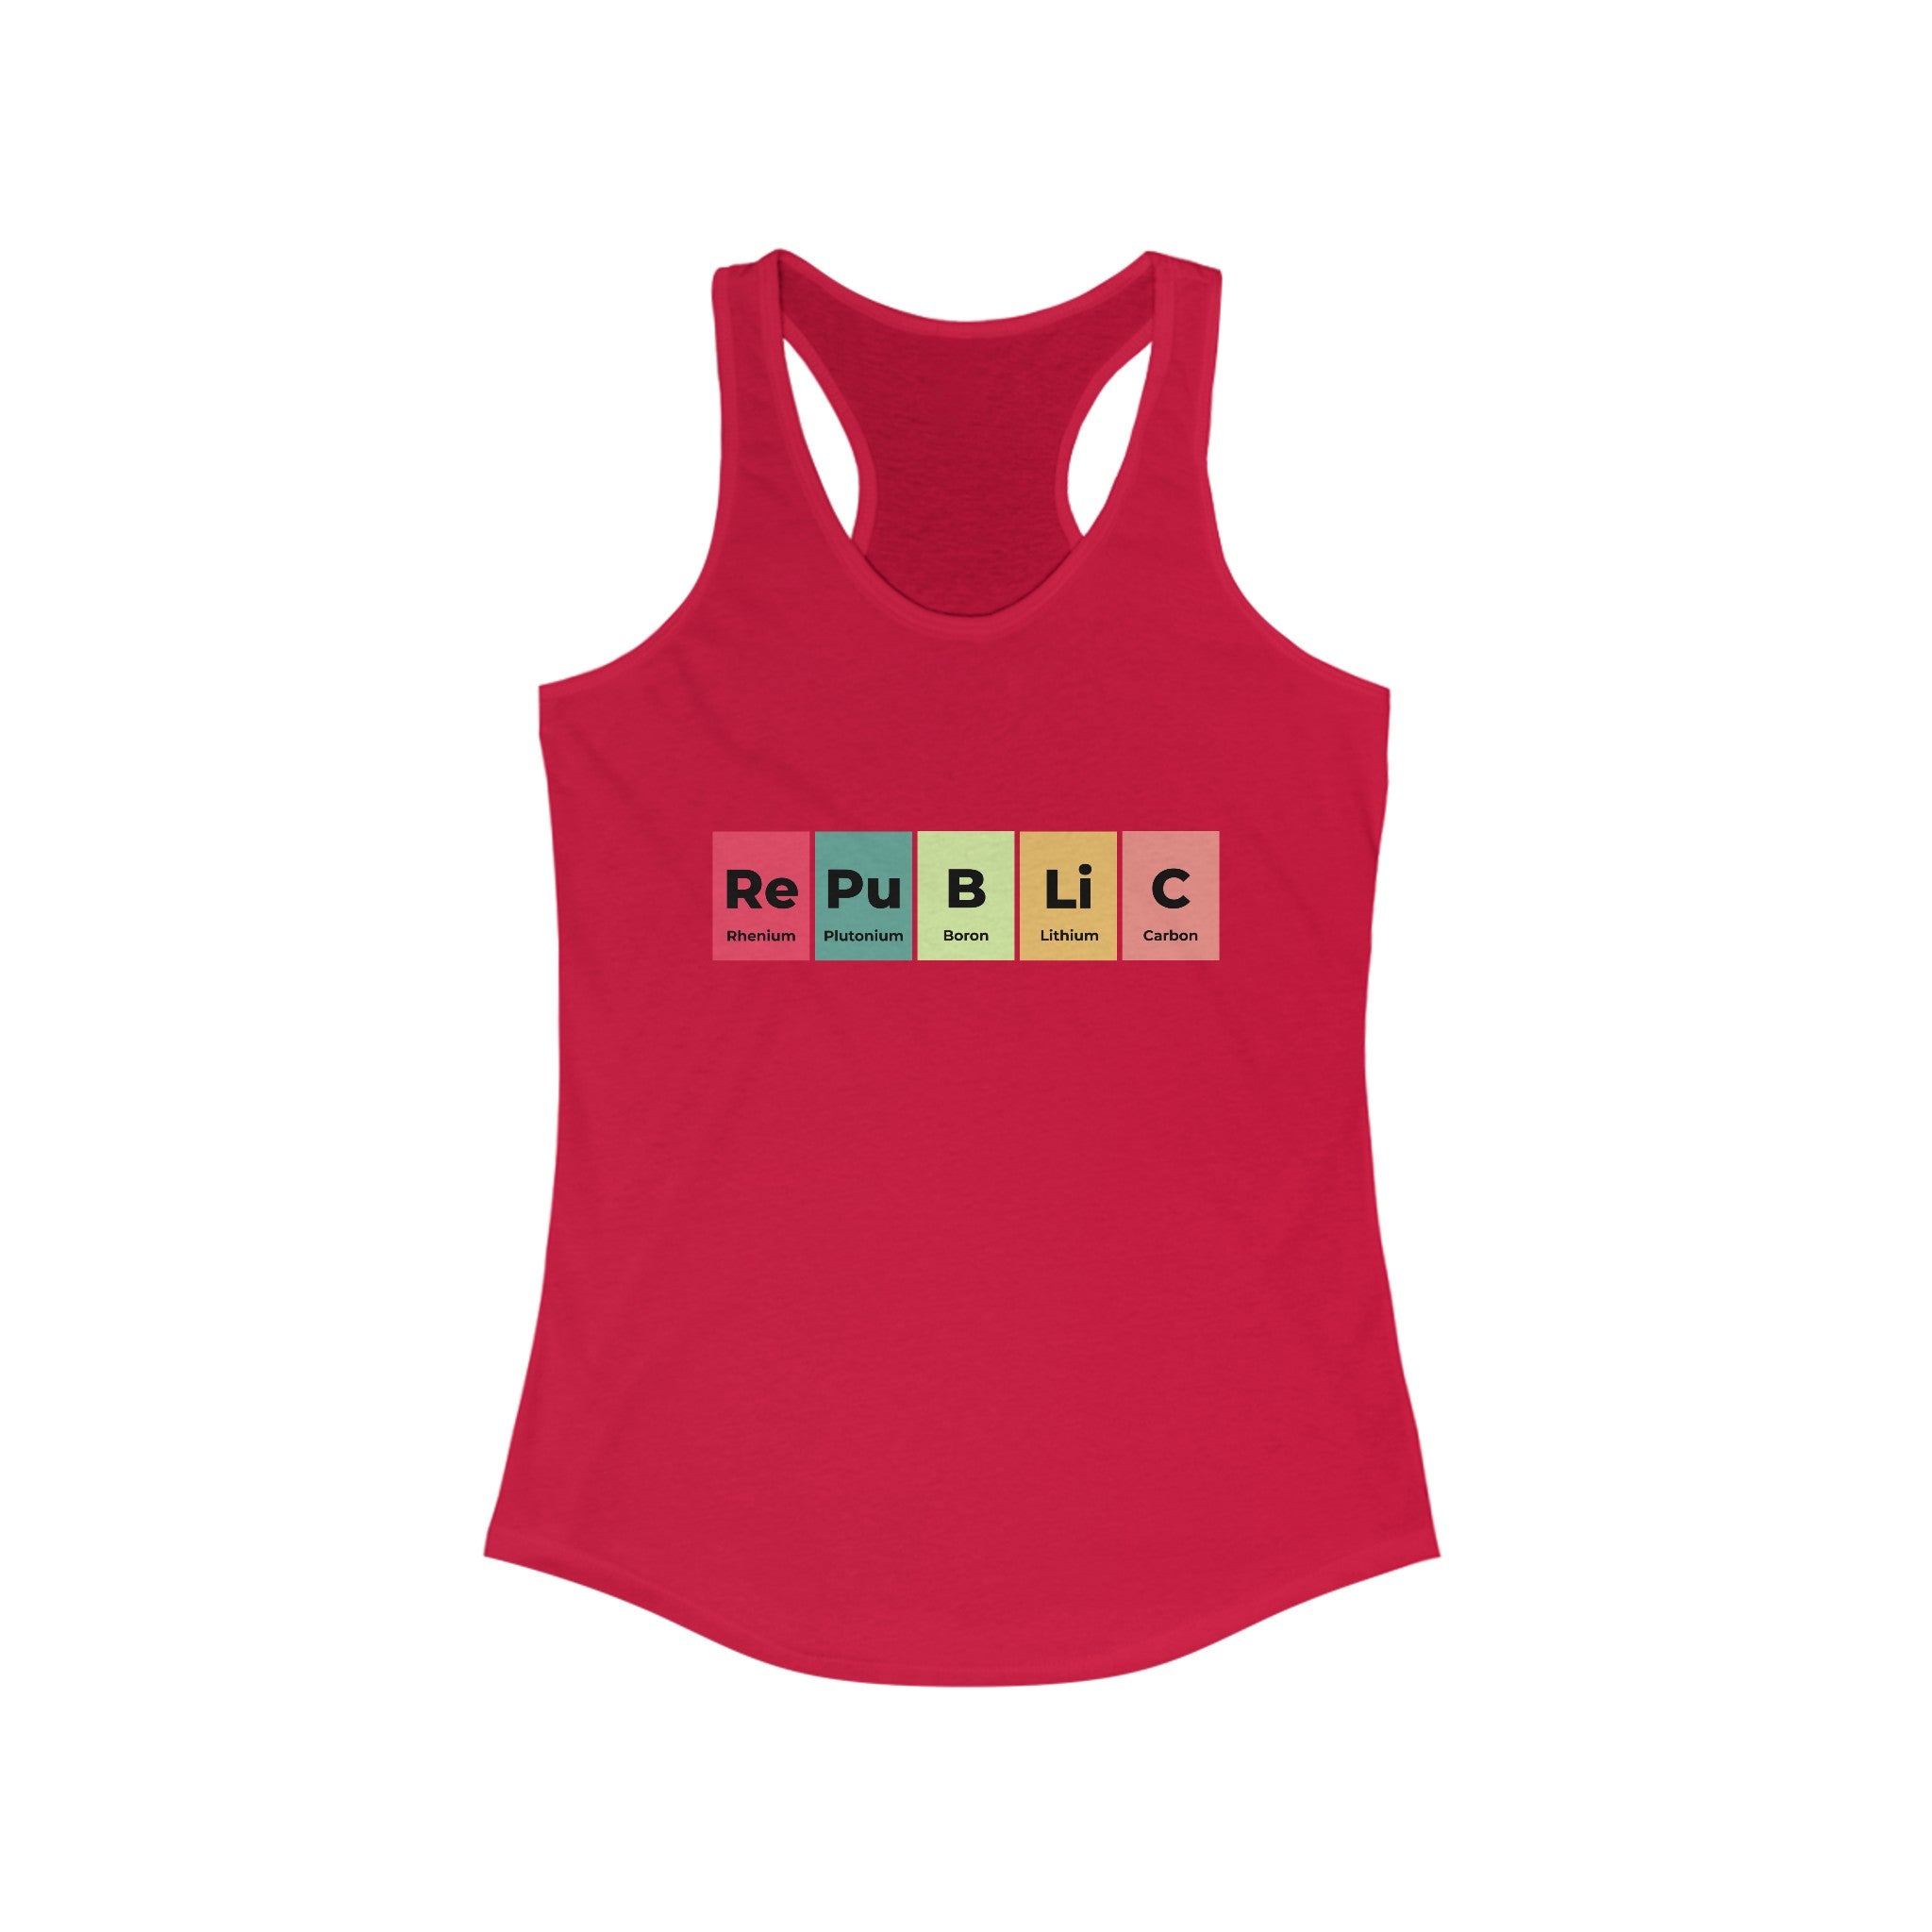 This ultra-lightweight Republic - Women's Racerback Tank features the word "Republic" cleverly spelled out using elements from the periodic table, perfect for your fitness journey.